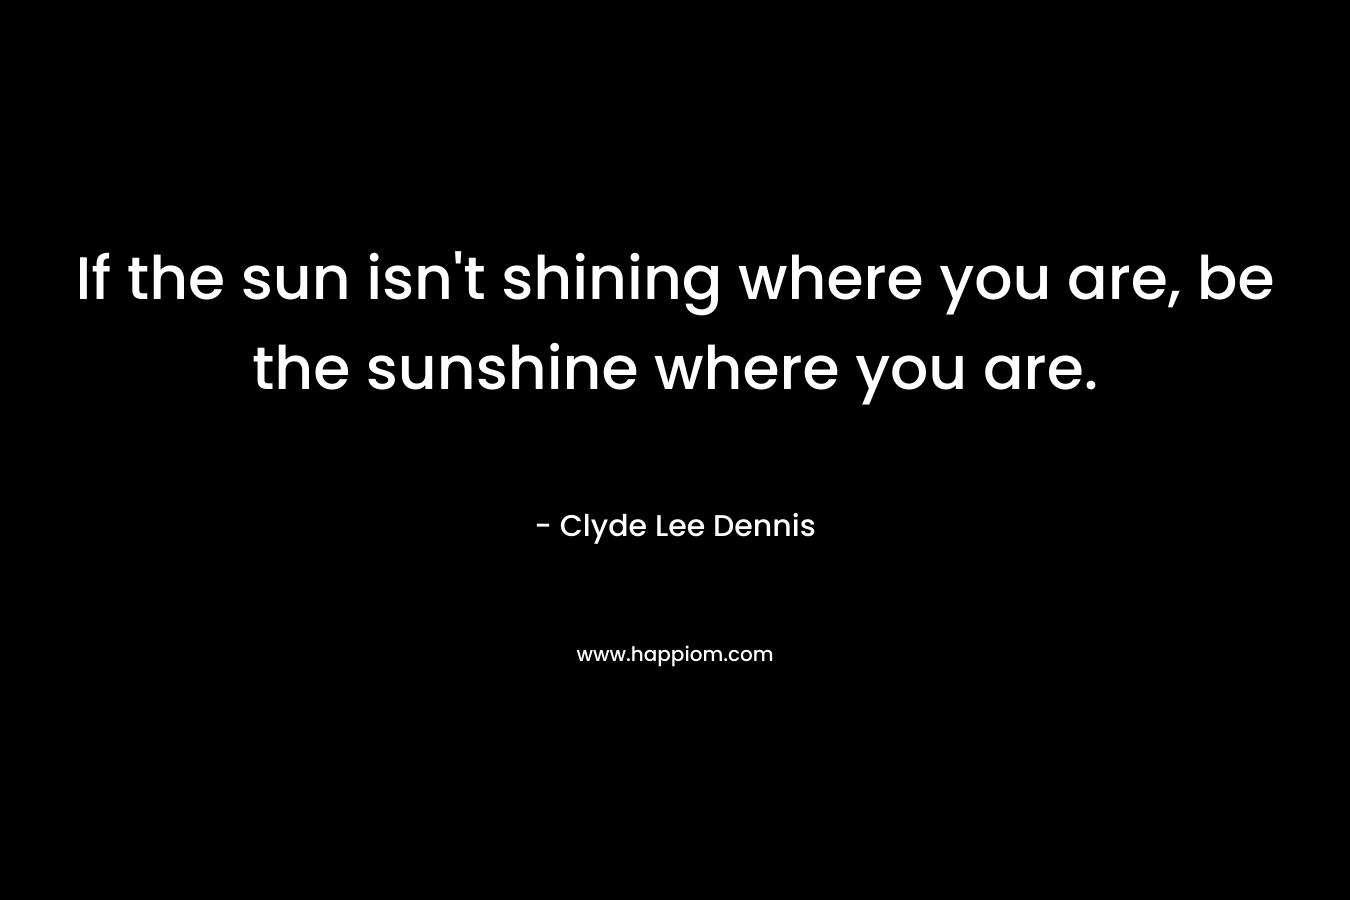 If the sun isn’t shining where you are, be the sunshine where you are. – Clyde Lee Dennis